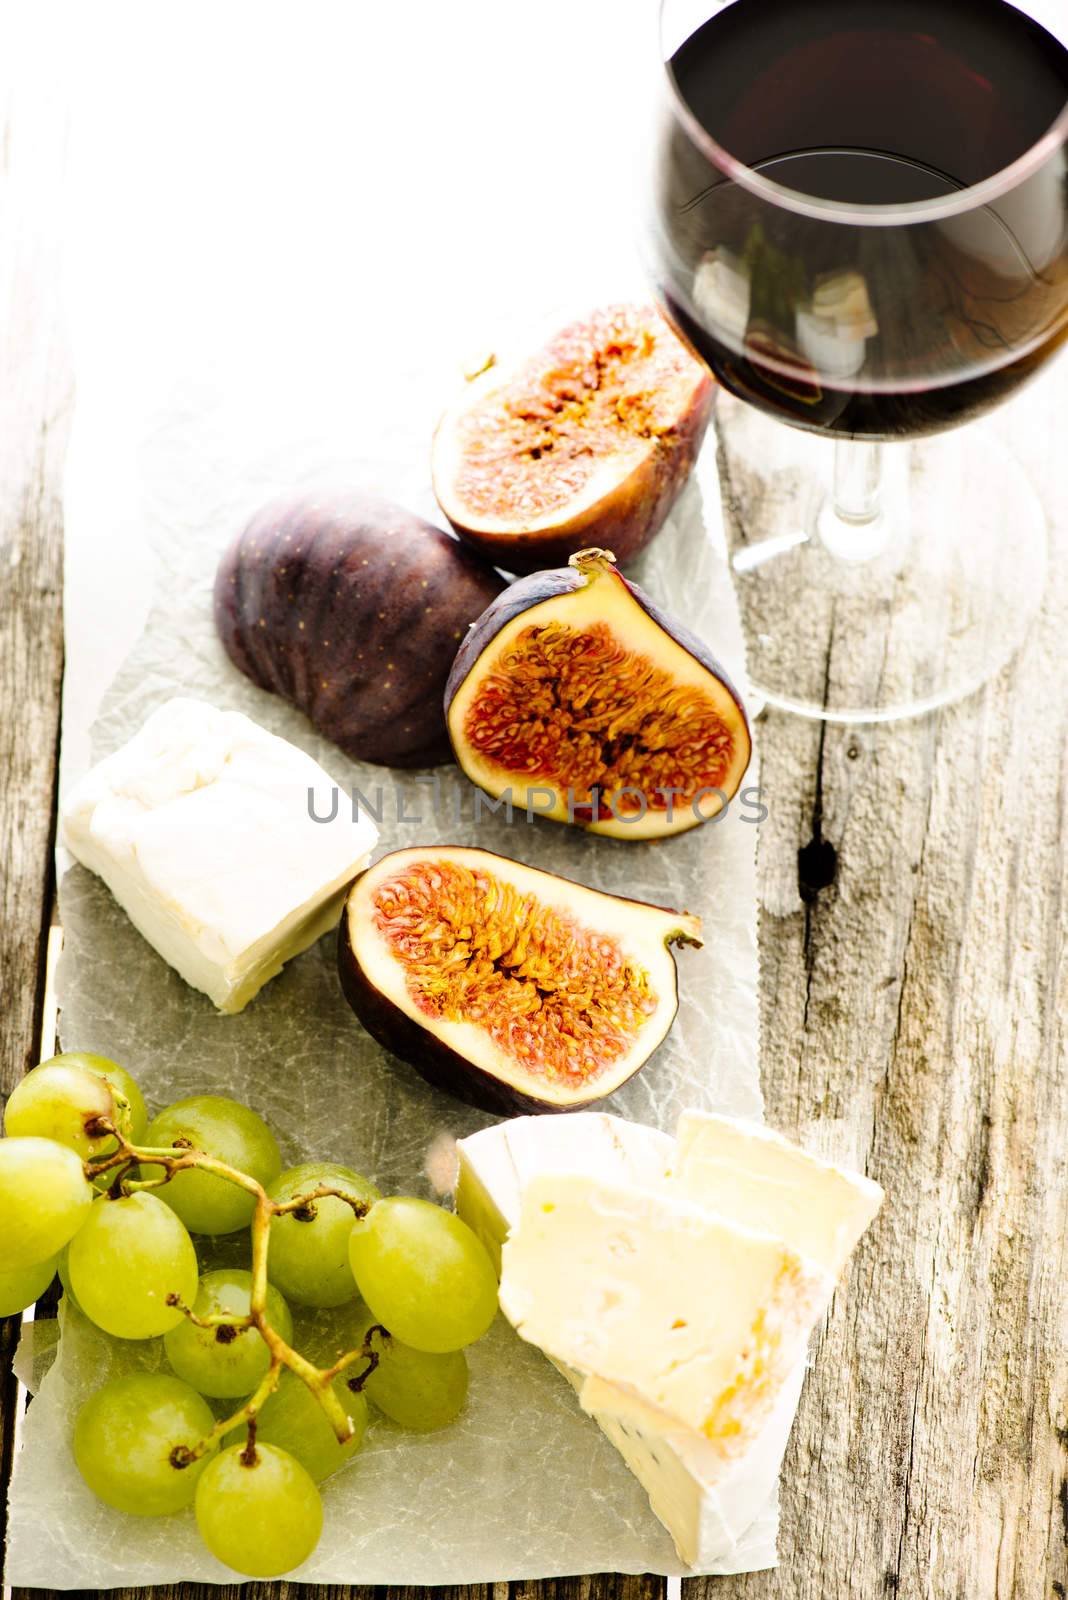 Figs, grape, cheese and glass of wine on wooden table